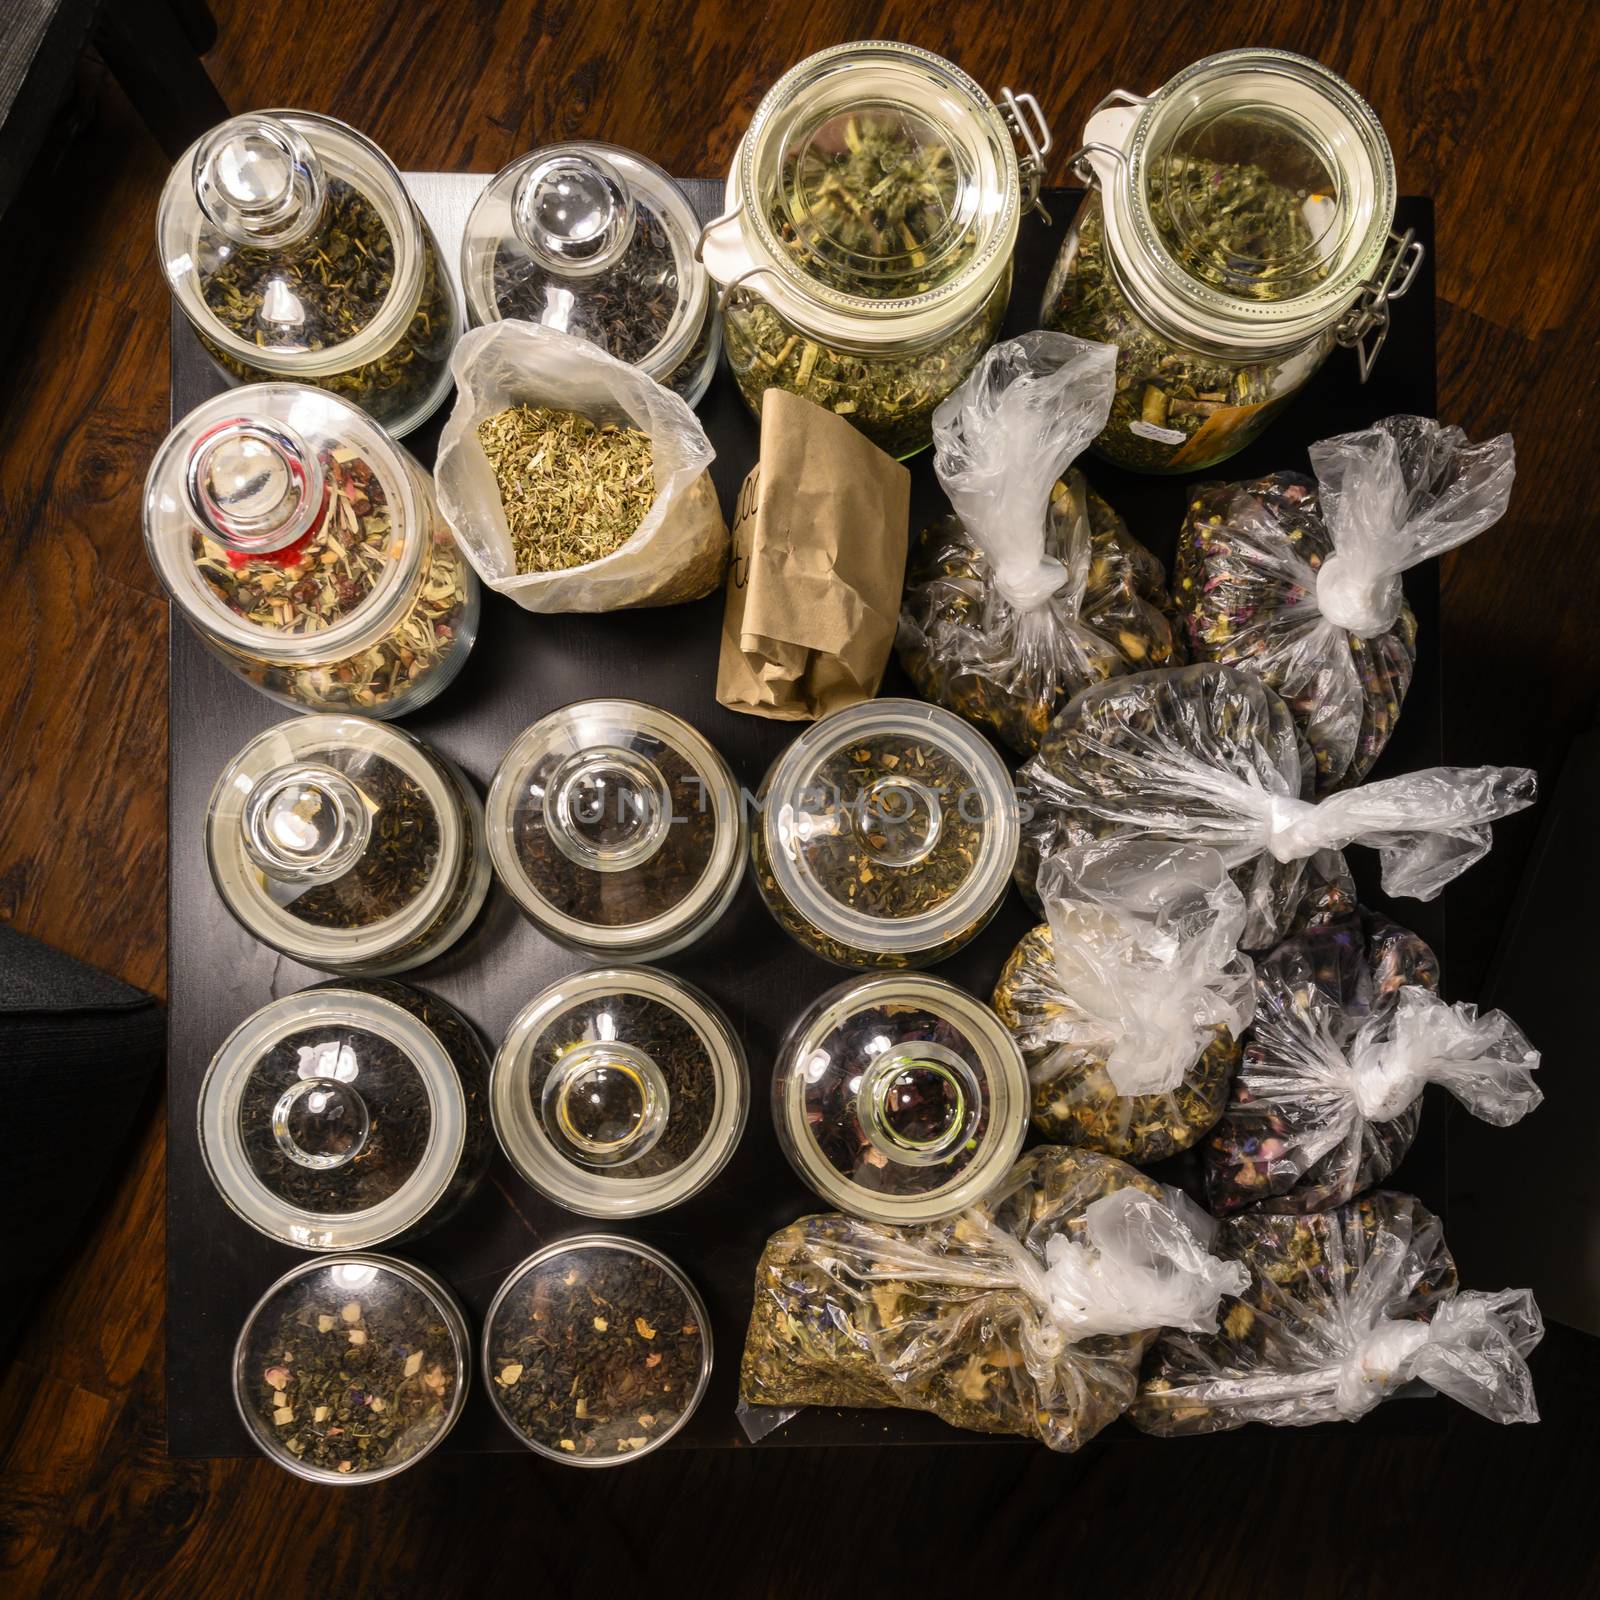 Set of teas in glass jars and bags.